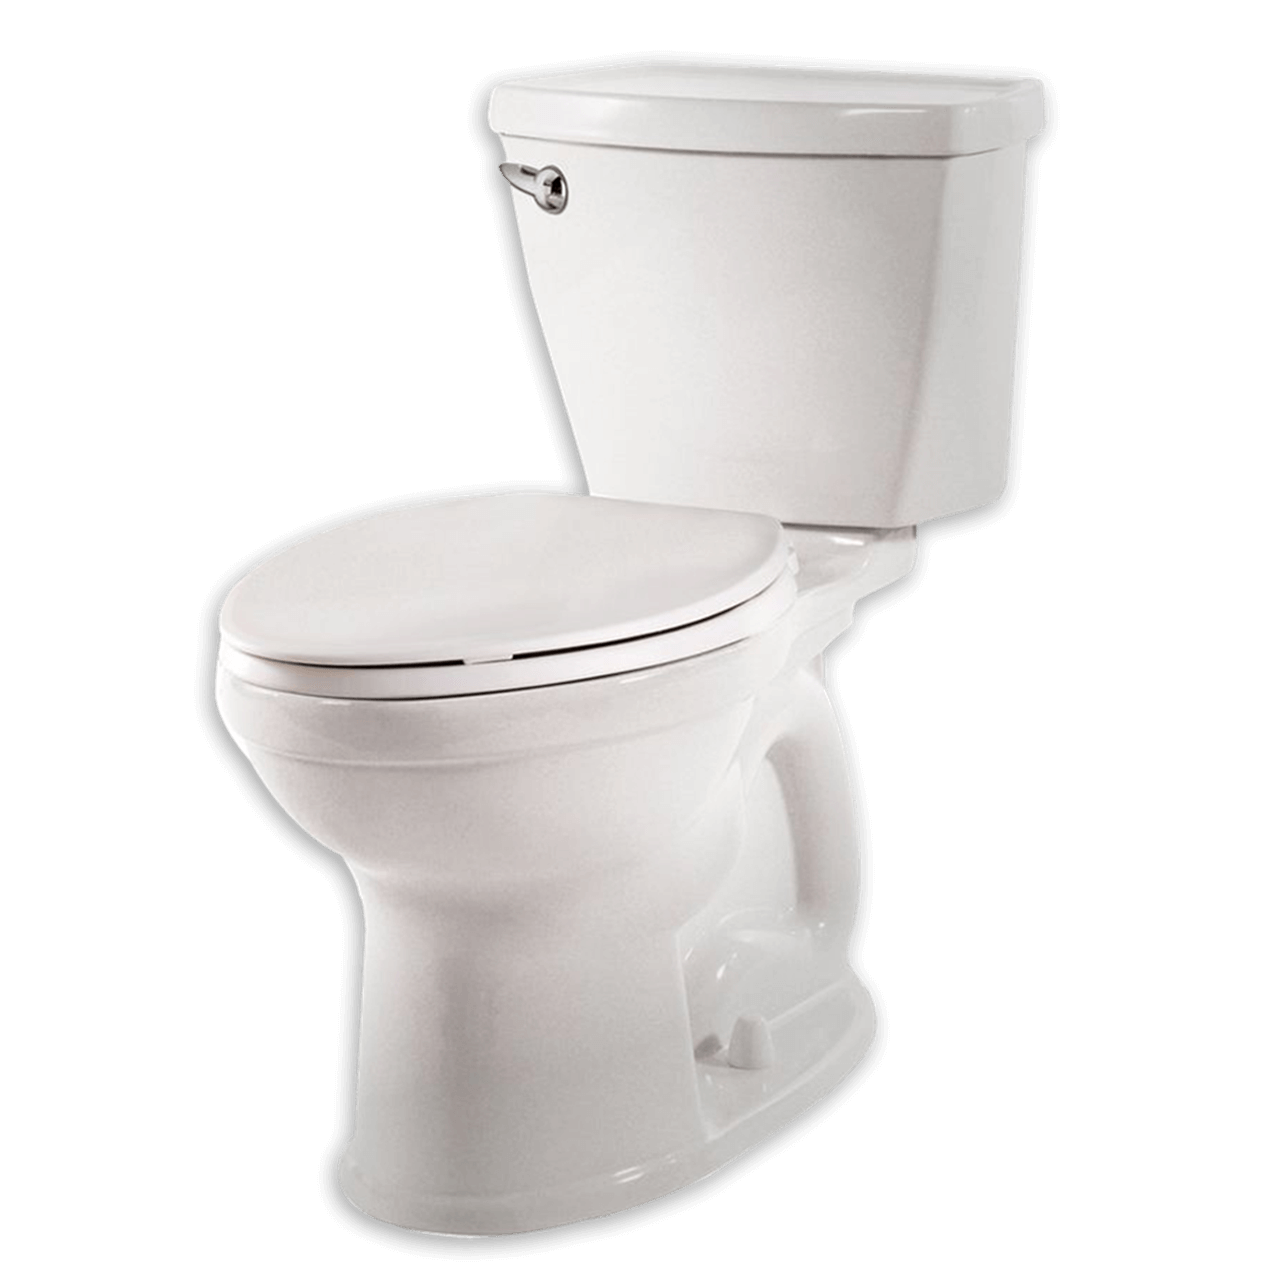 American Standard Champion 4 Right Height Elongated Complete Toilet